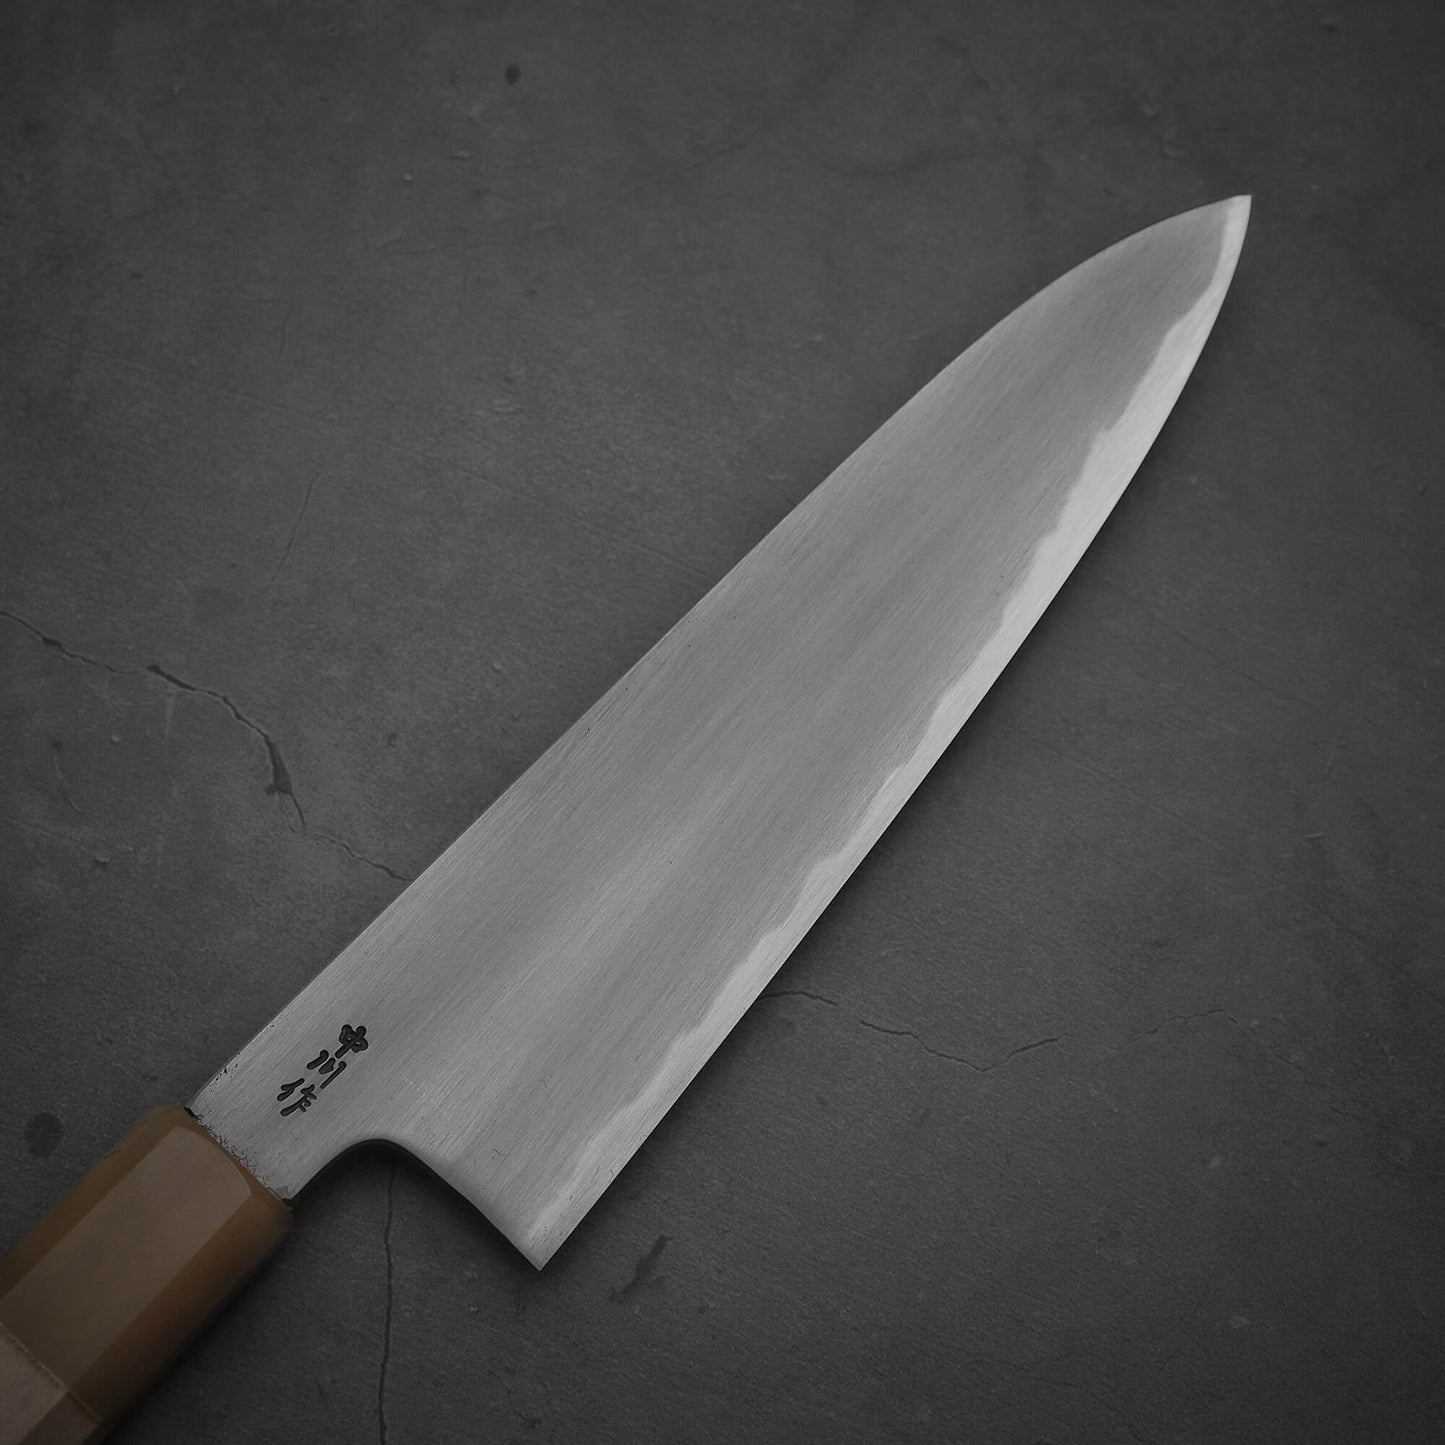 Top view of the blade of Nakagawa aogami#2 gyuto knife. Image shows the right side of the blade.